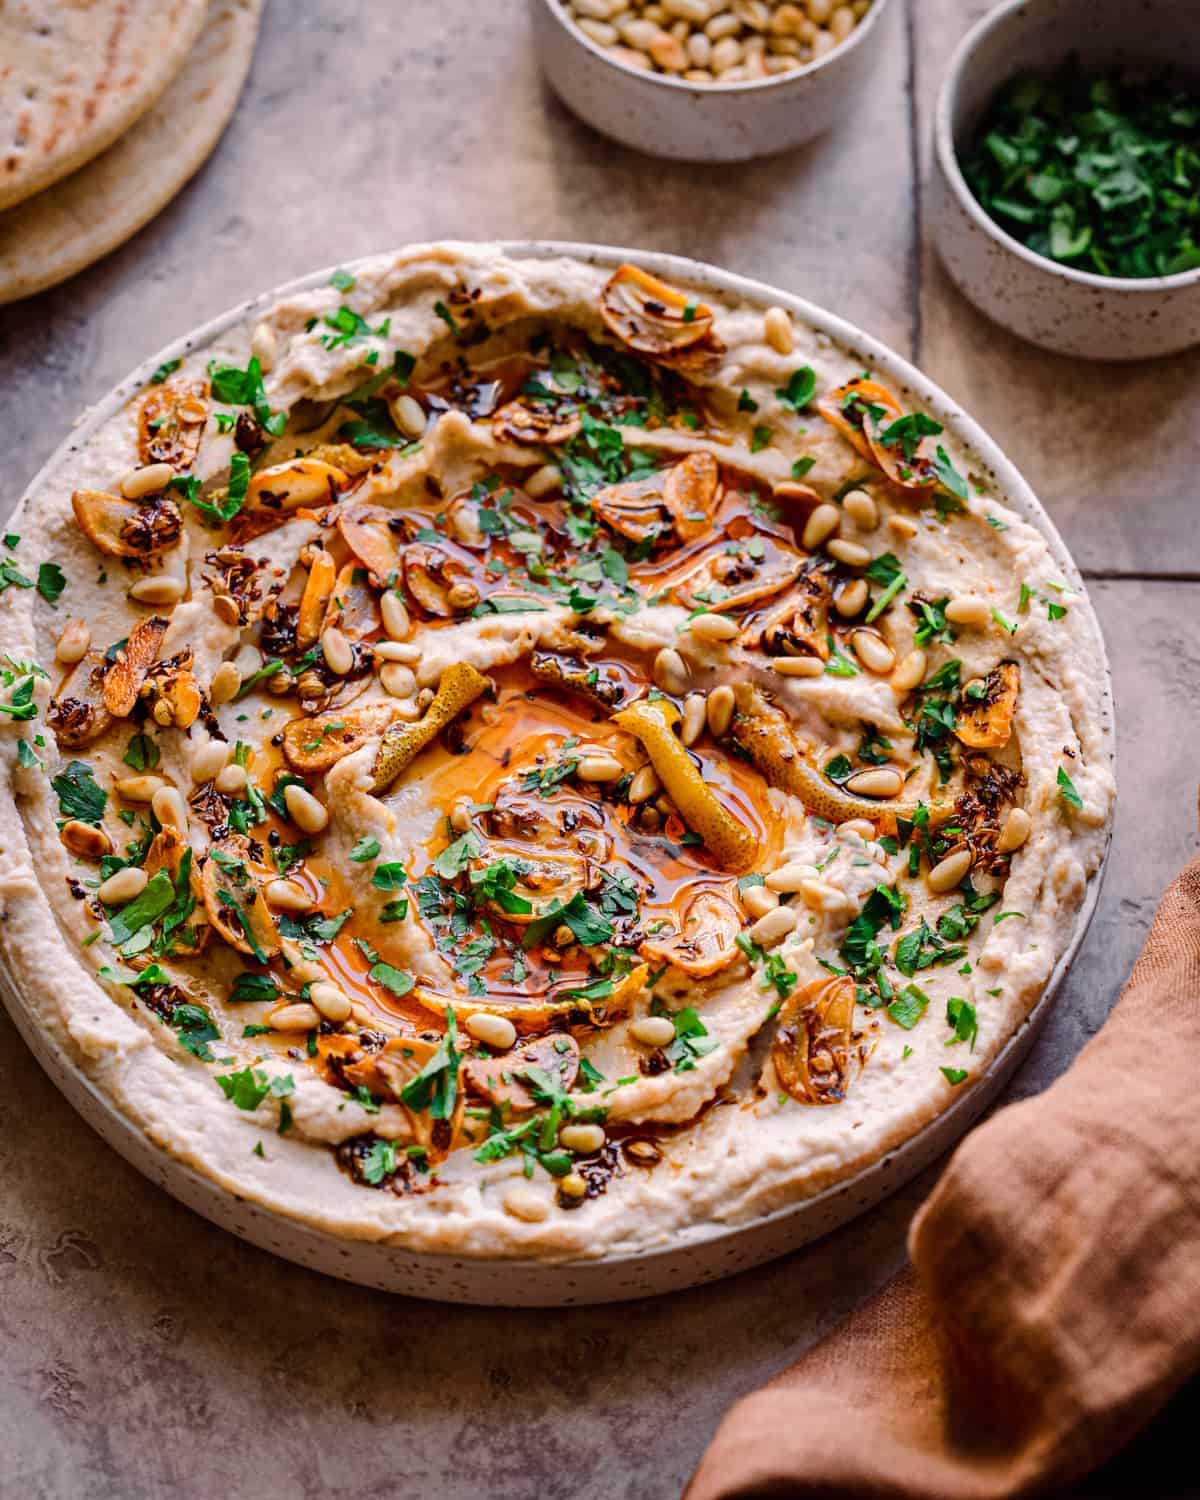 white bean dip with chili oil, garlic, parsley and pine nuts on tiled surface with pita bread